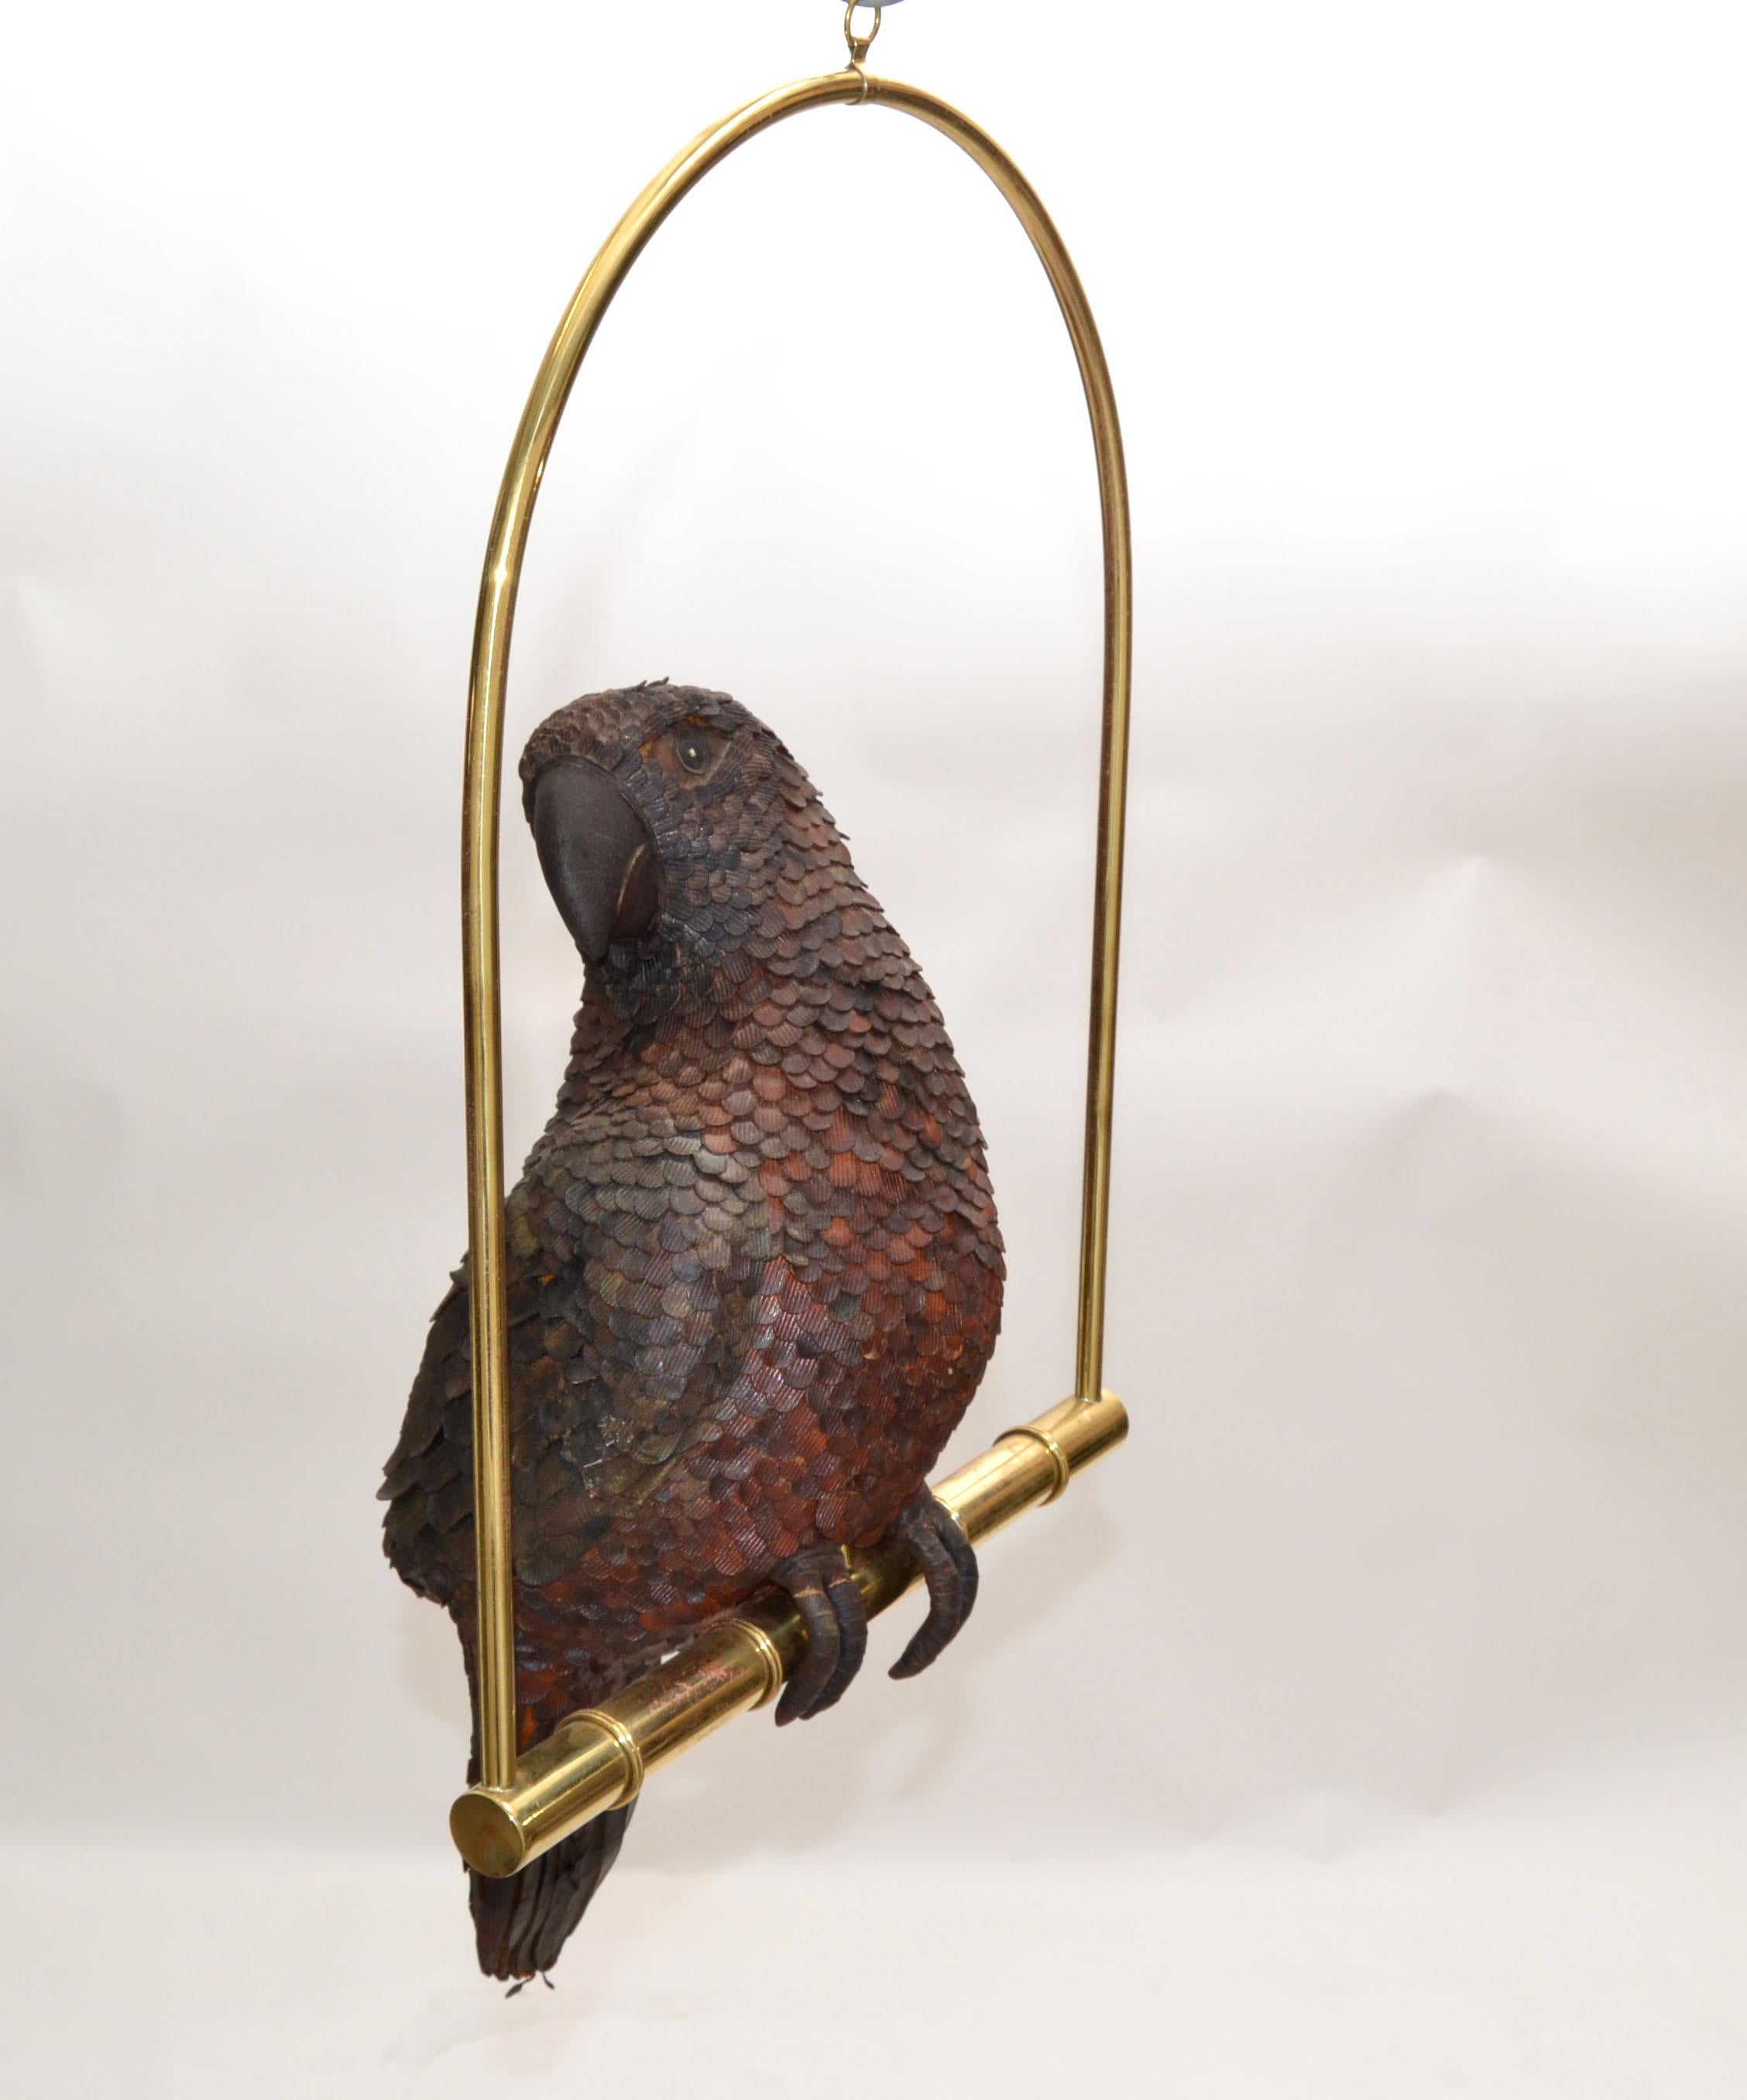 Signed Federico Mexico Leather Parrot Perched on Brass Swing Mid-Century Modern For Sale 2